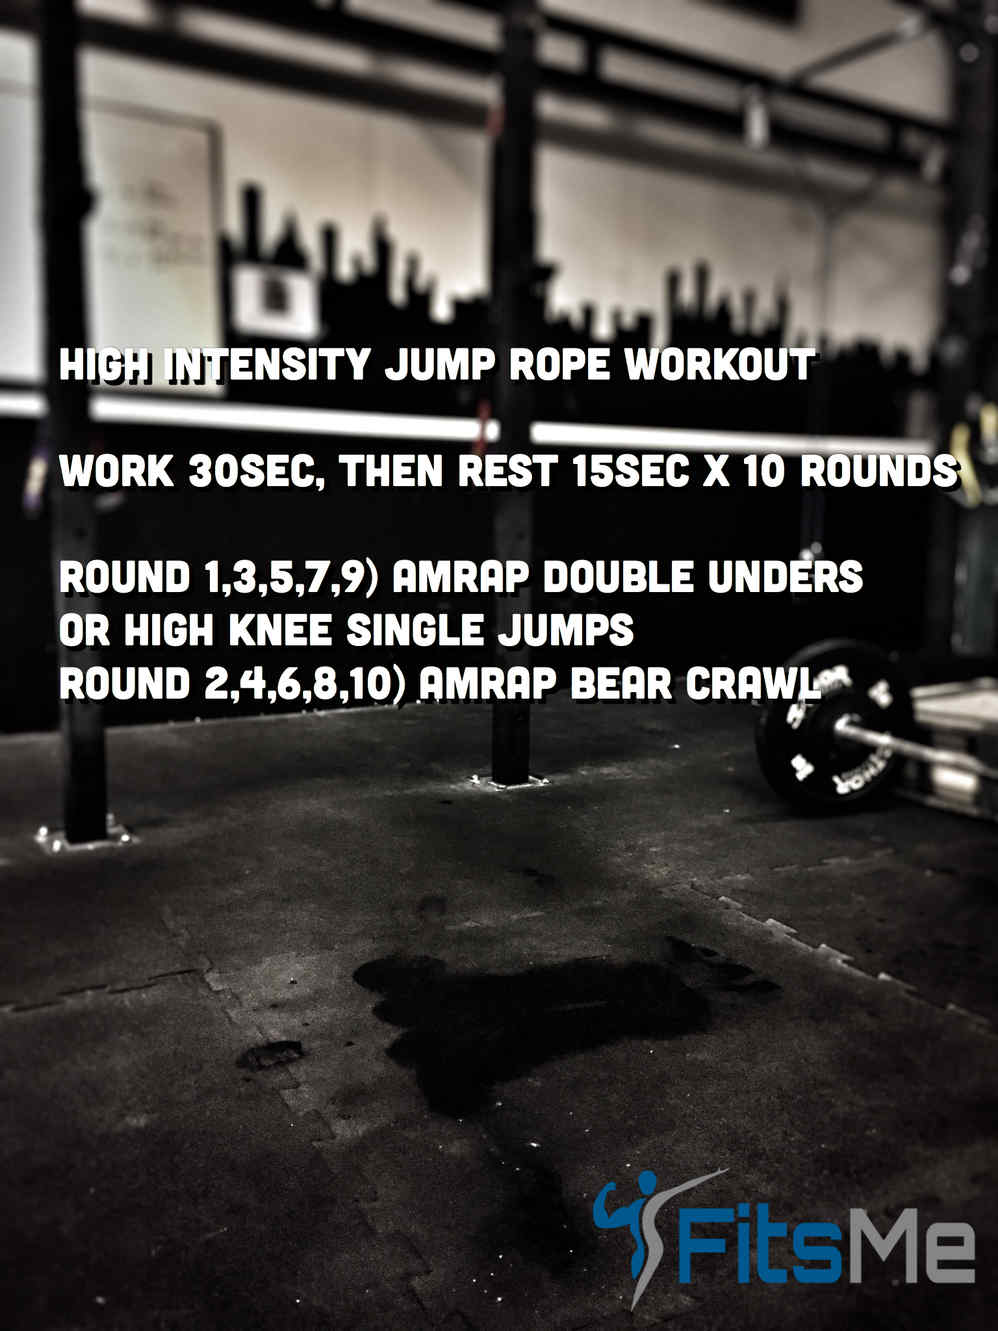 High intensity jump rope workout